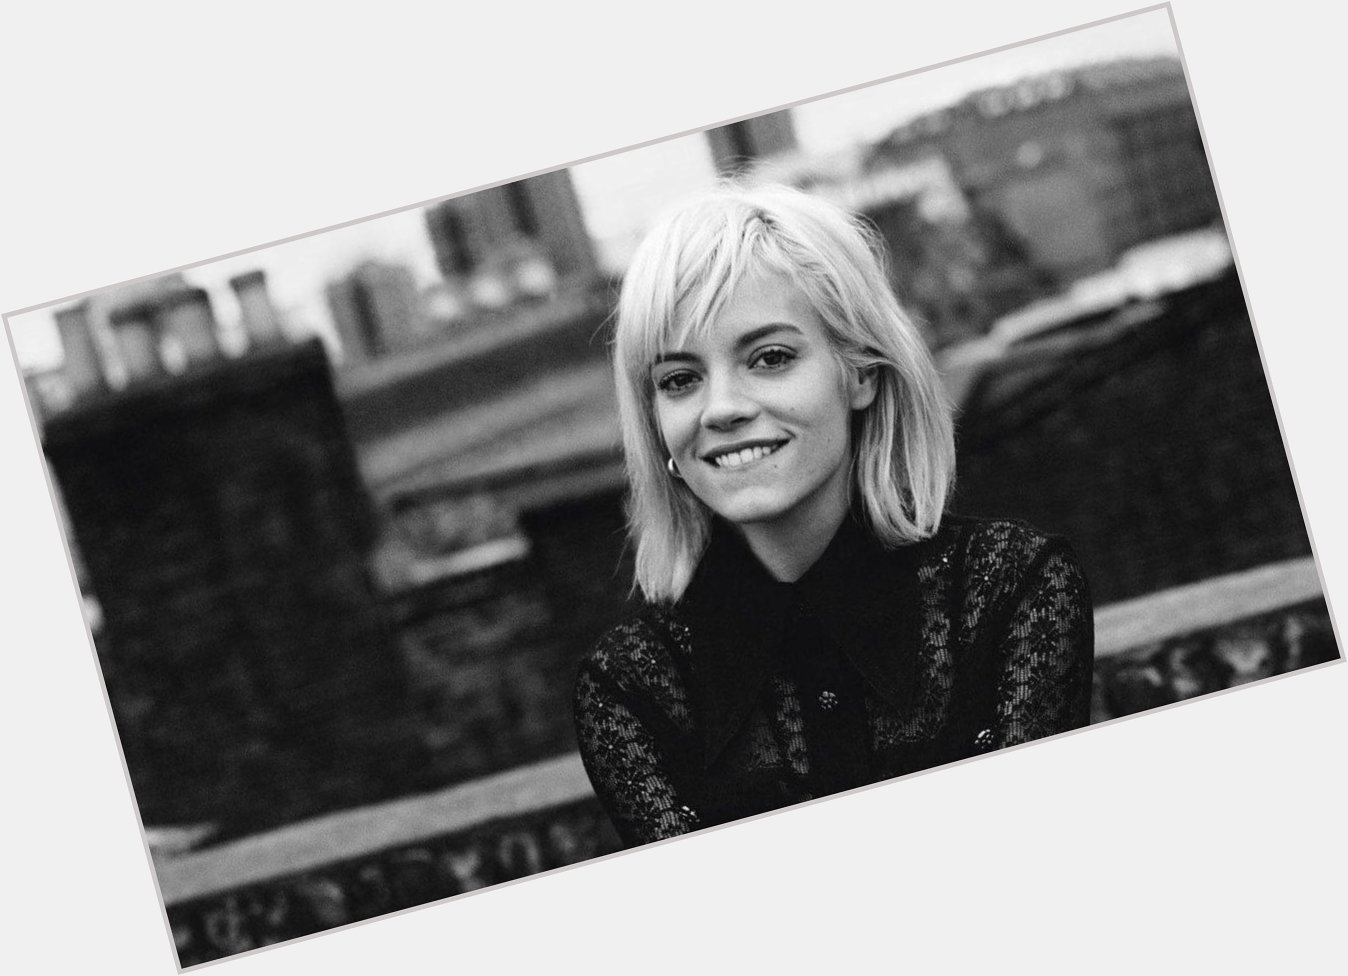 Happy birthday Lily Allen! Listen to her, and other great artists at  